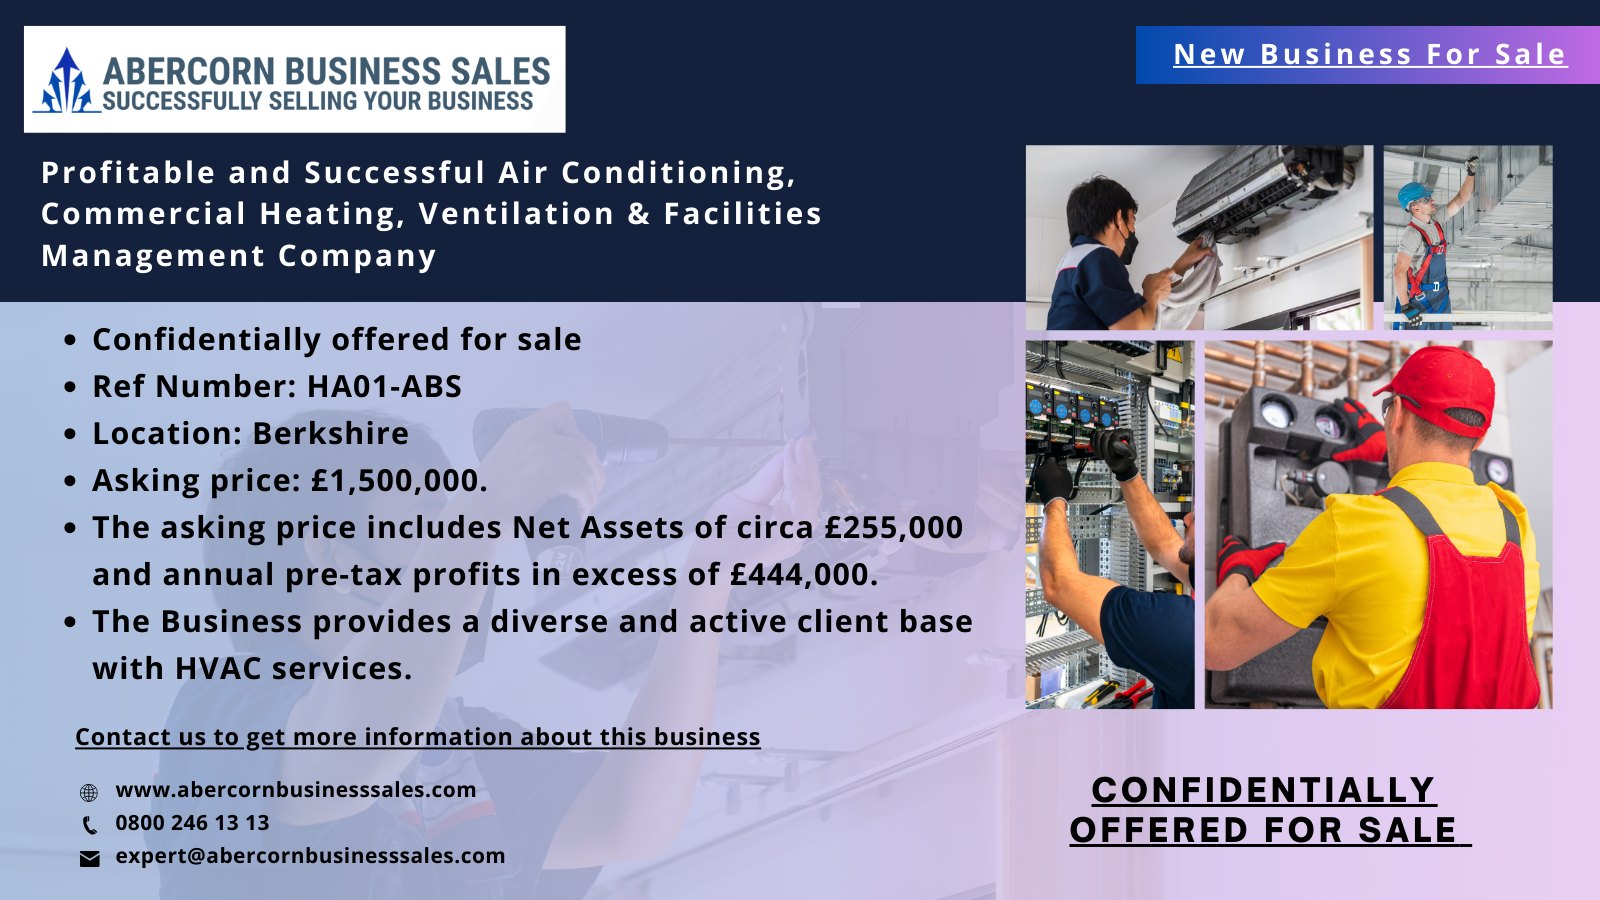 HA01-ABS - Profitable and Successful Air Conditioning, Commercial Heating, Ventilation & Facilities Management Company